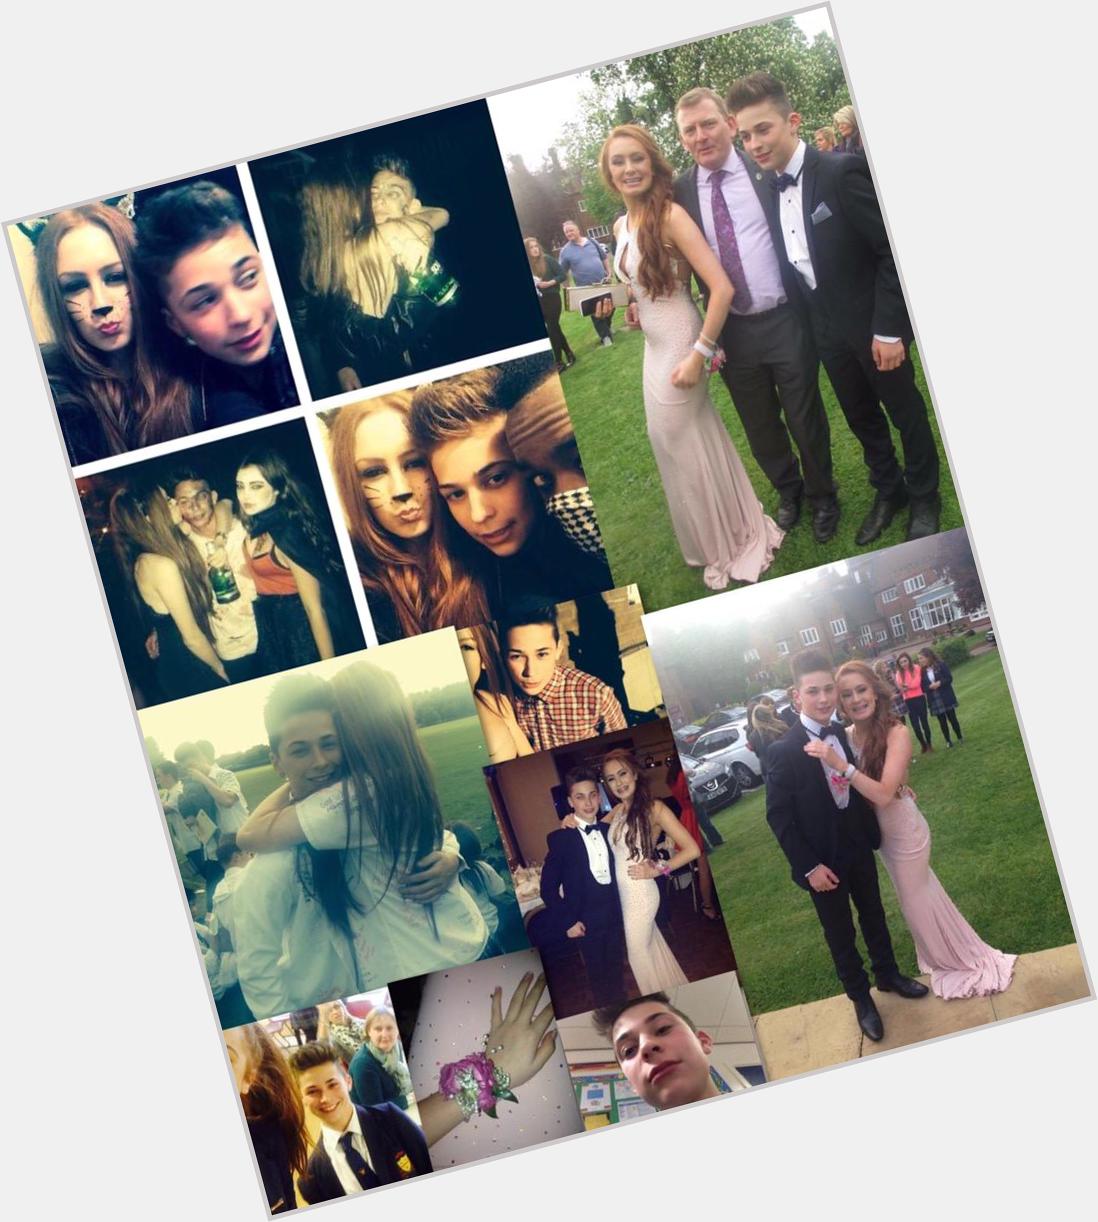 Happy birthday to my pal and year 11 prom date   p.s soz they are really old piccys X 